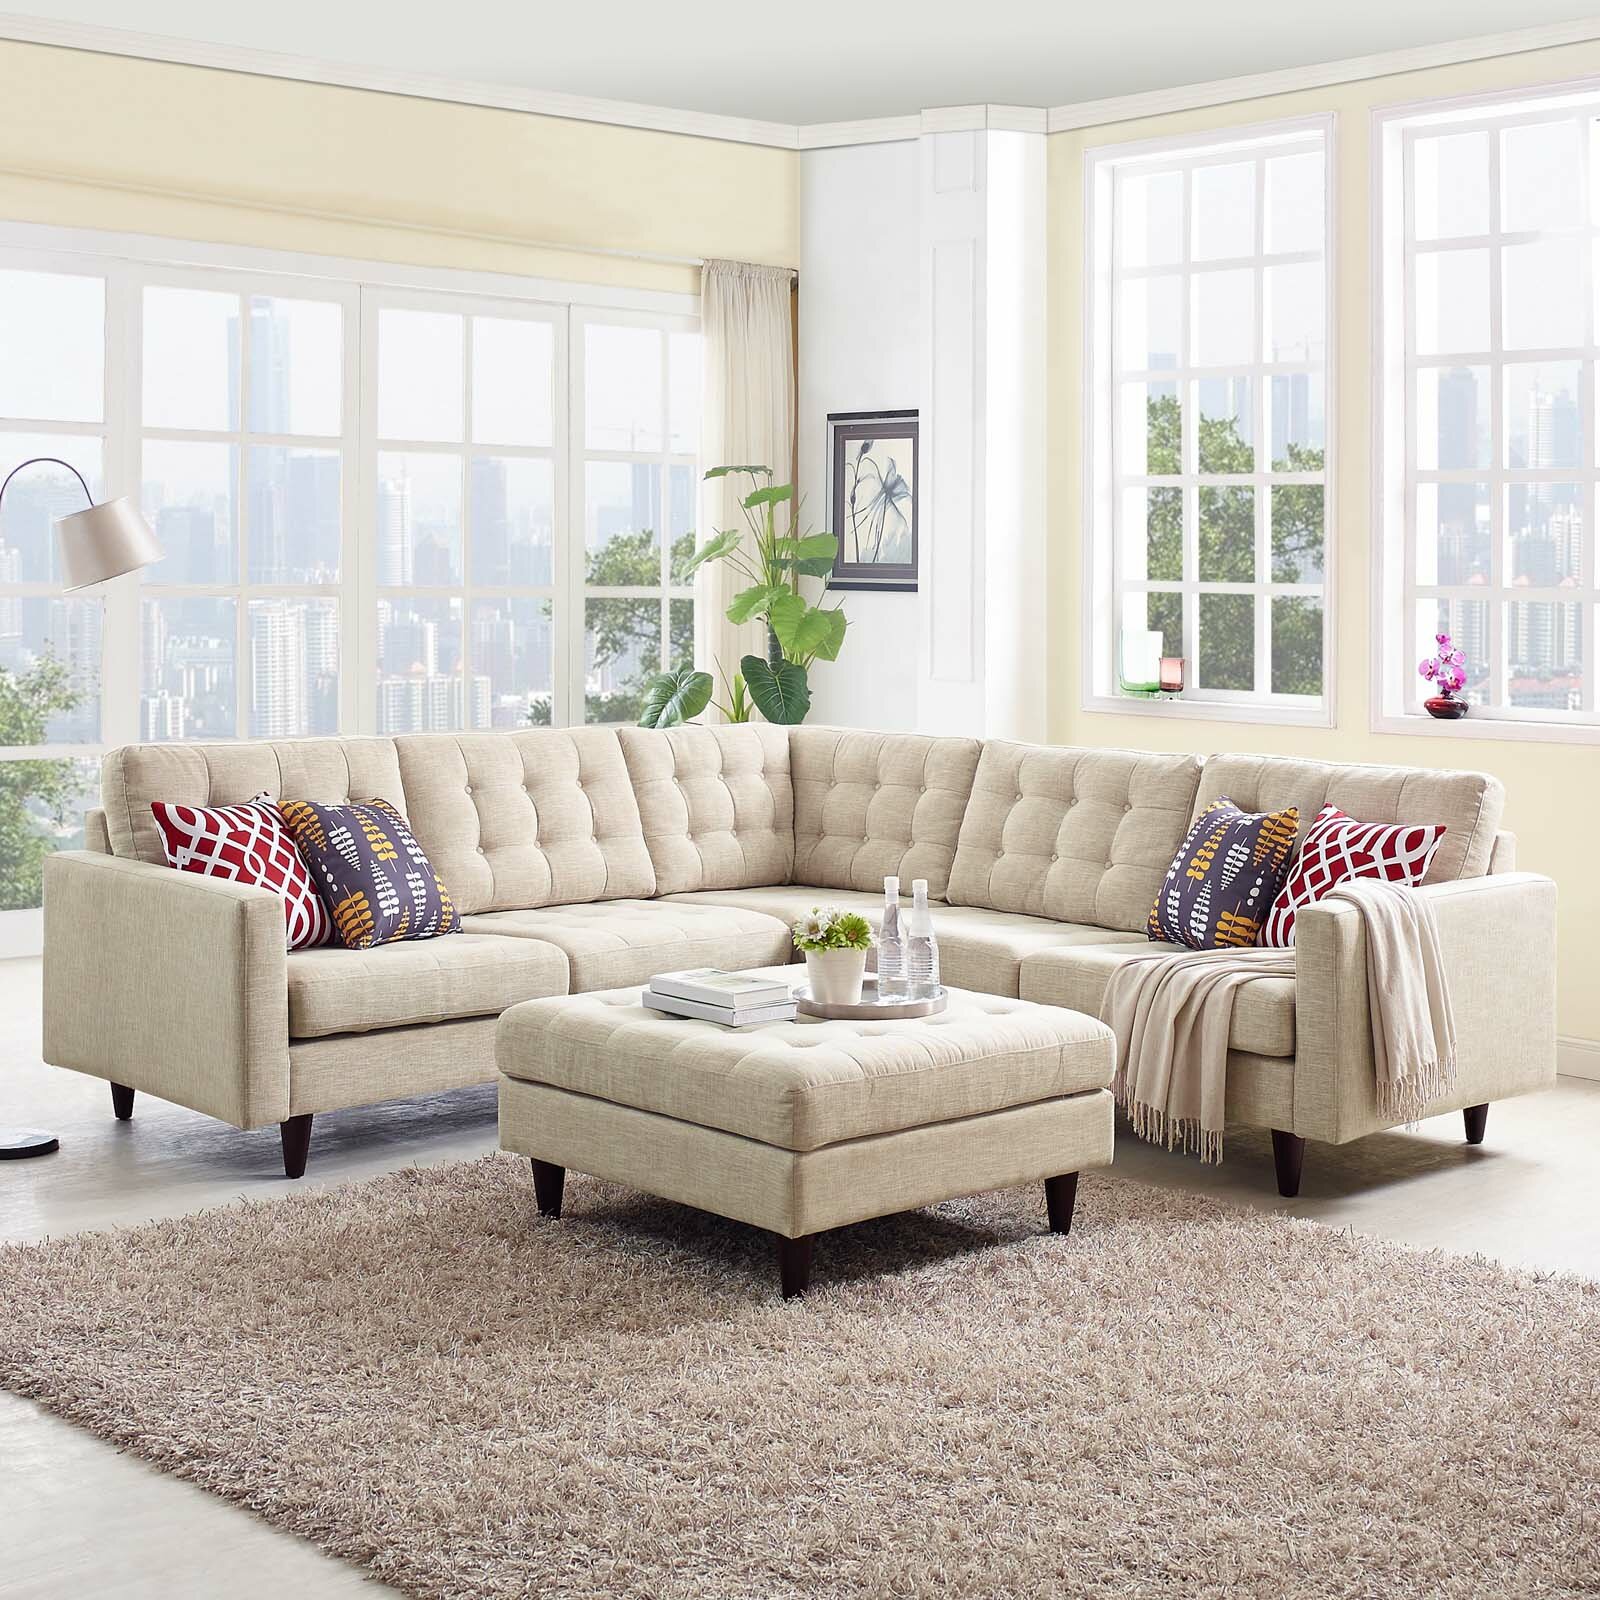 How To Measure For A Sectional Sofa Wayfair